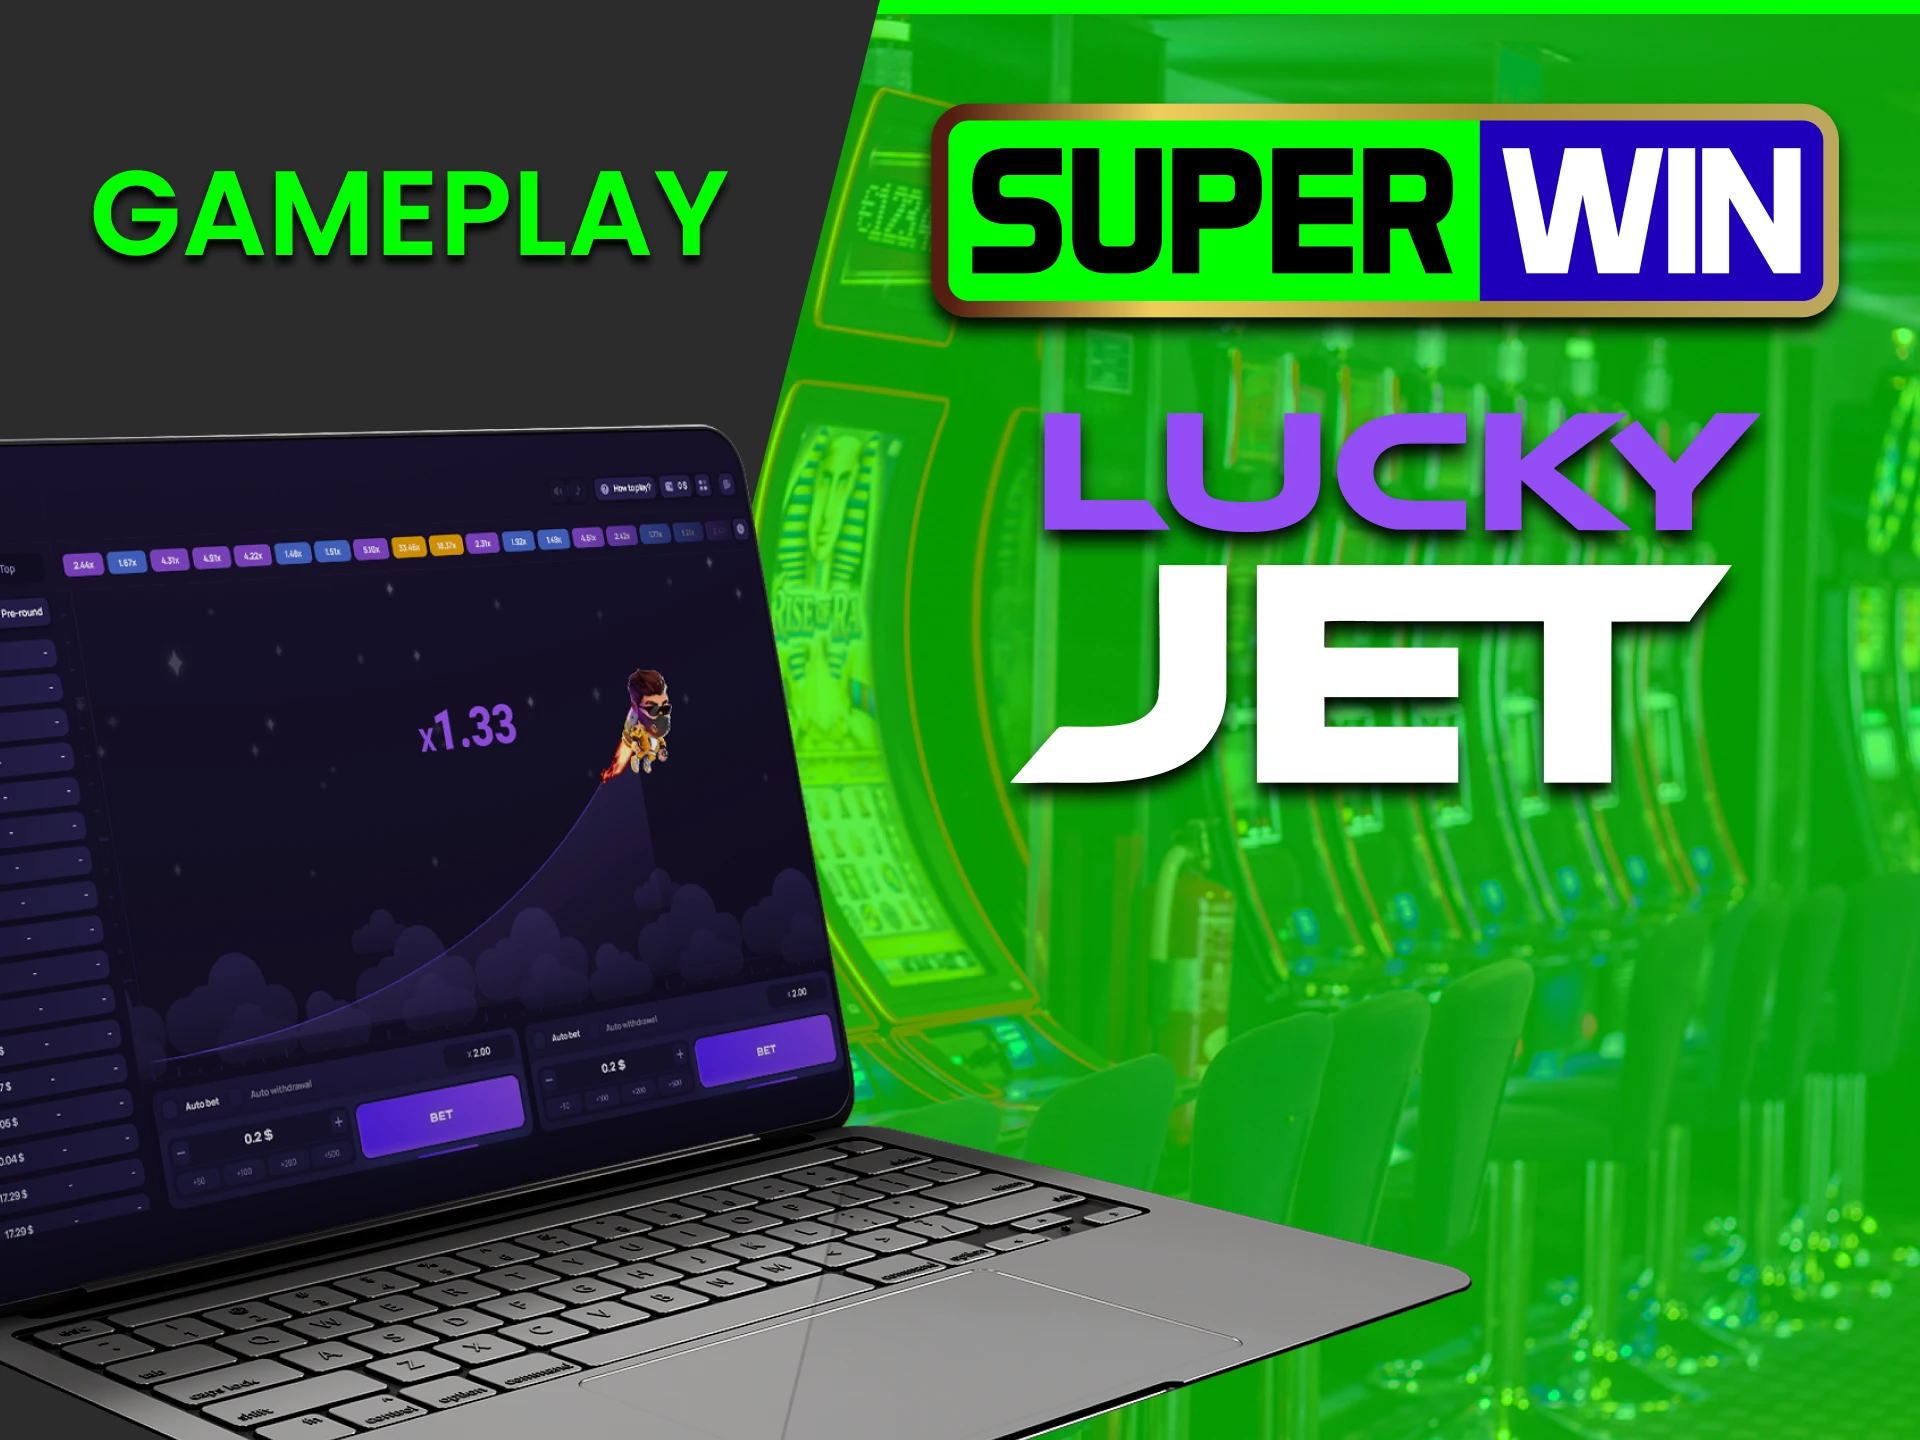 You can study the gameplay of the game Lucky Jet on the Superwin service.